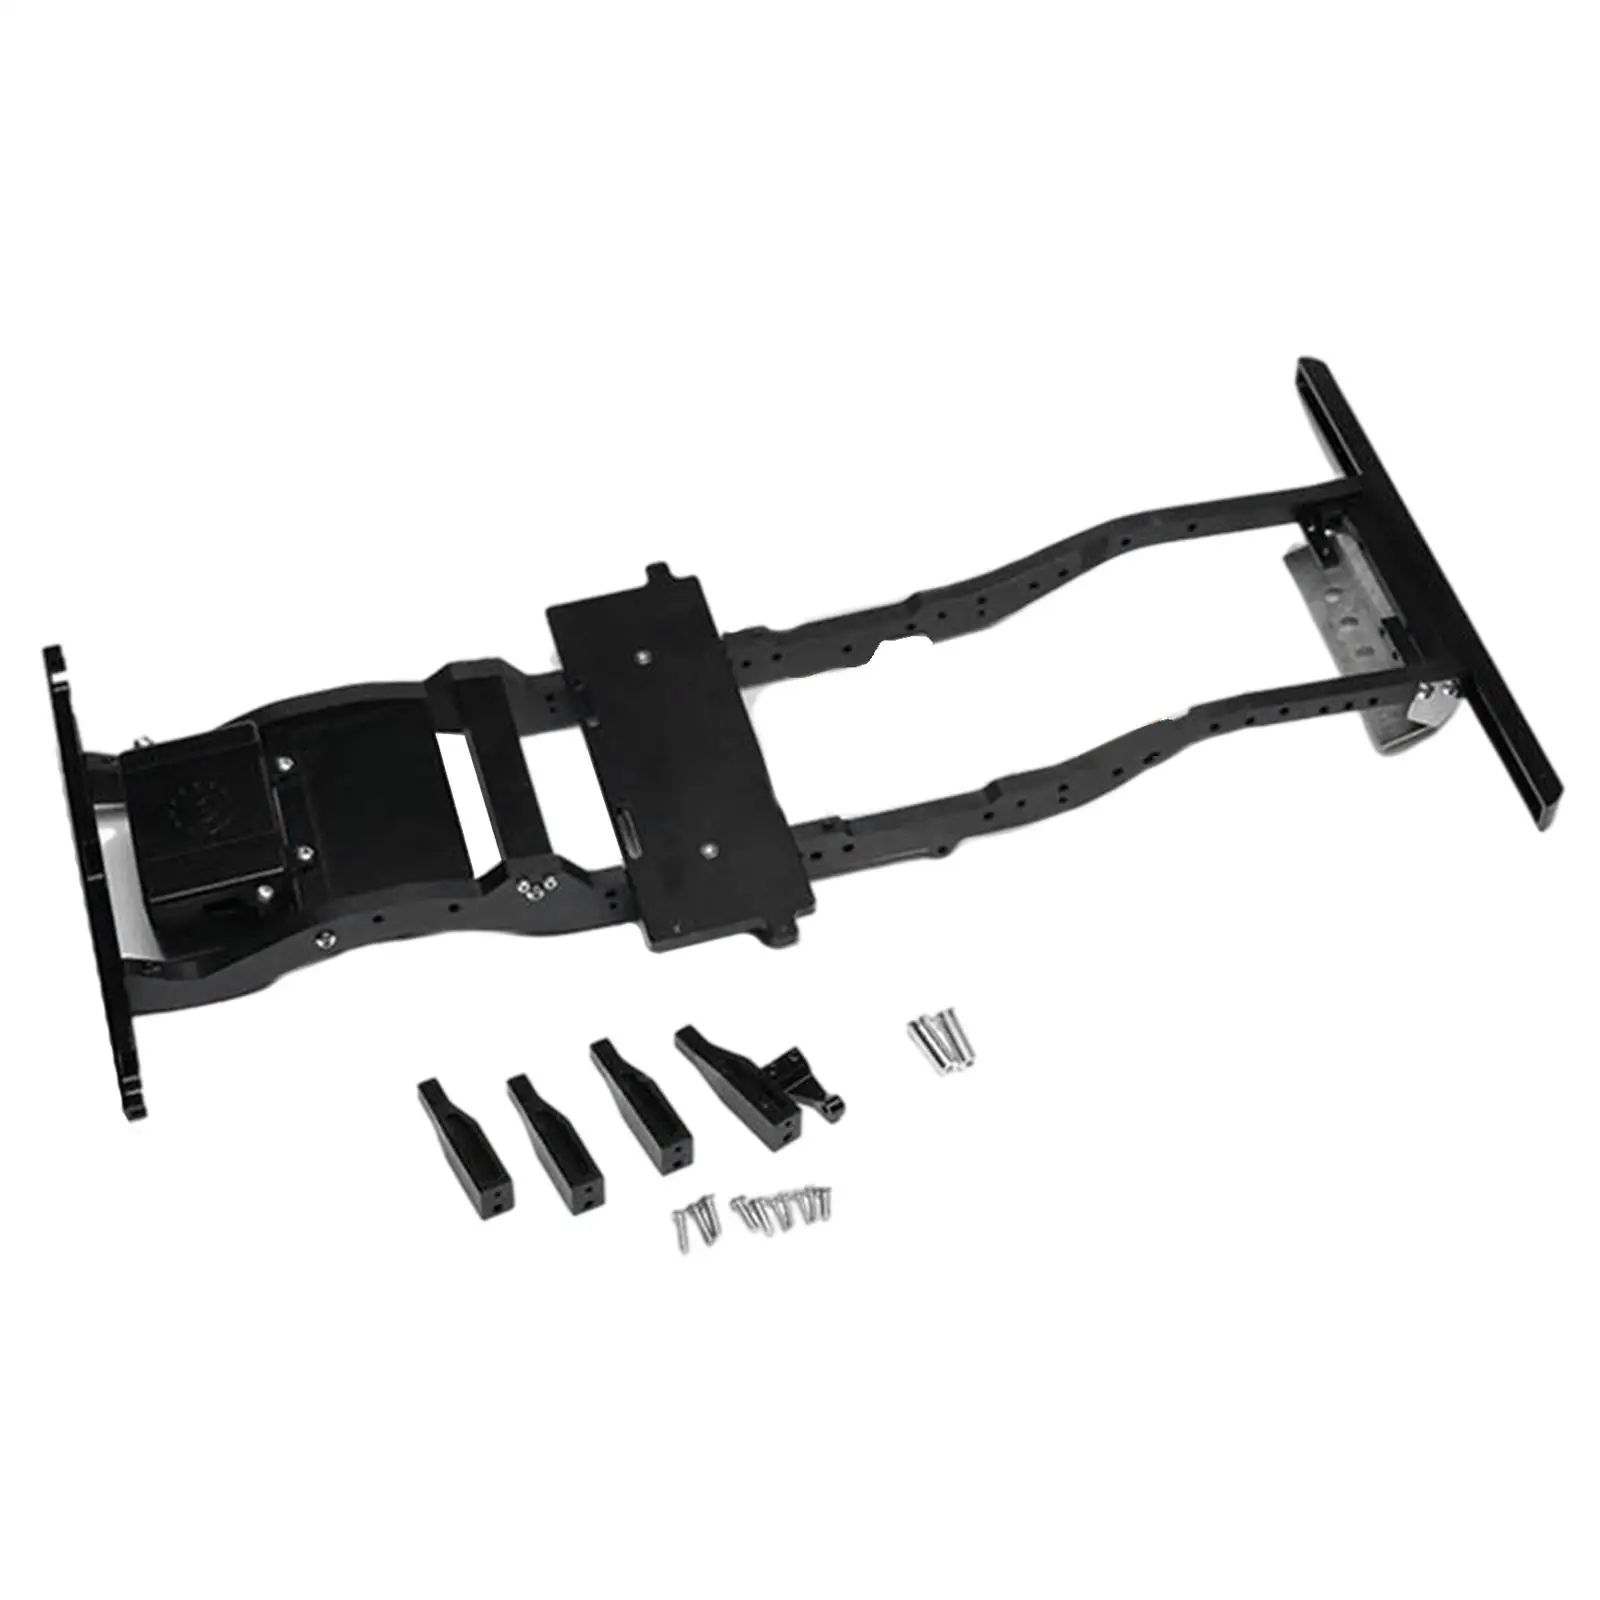 1:10 RC Metal Beam Body Frame Kit for Axial SCX10 D90 Vehicles DIY Accessory